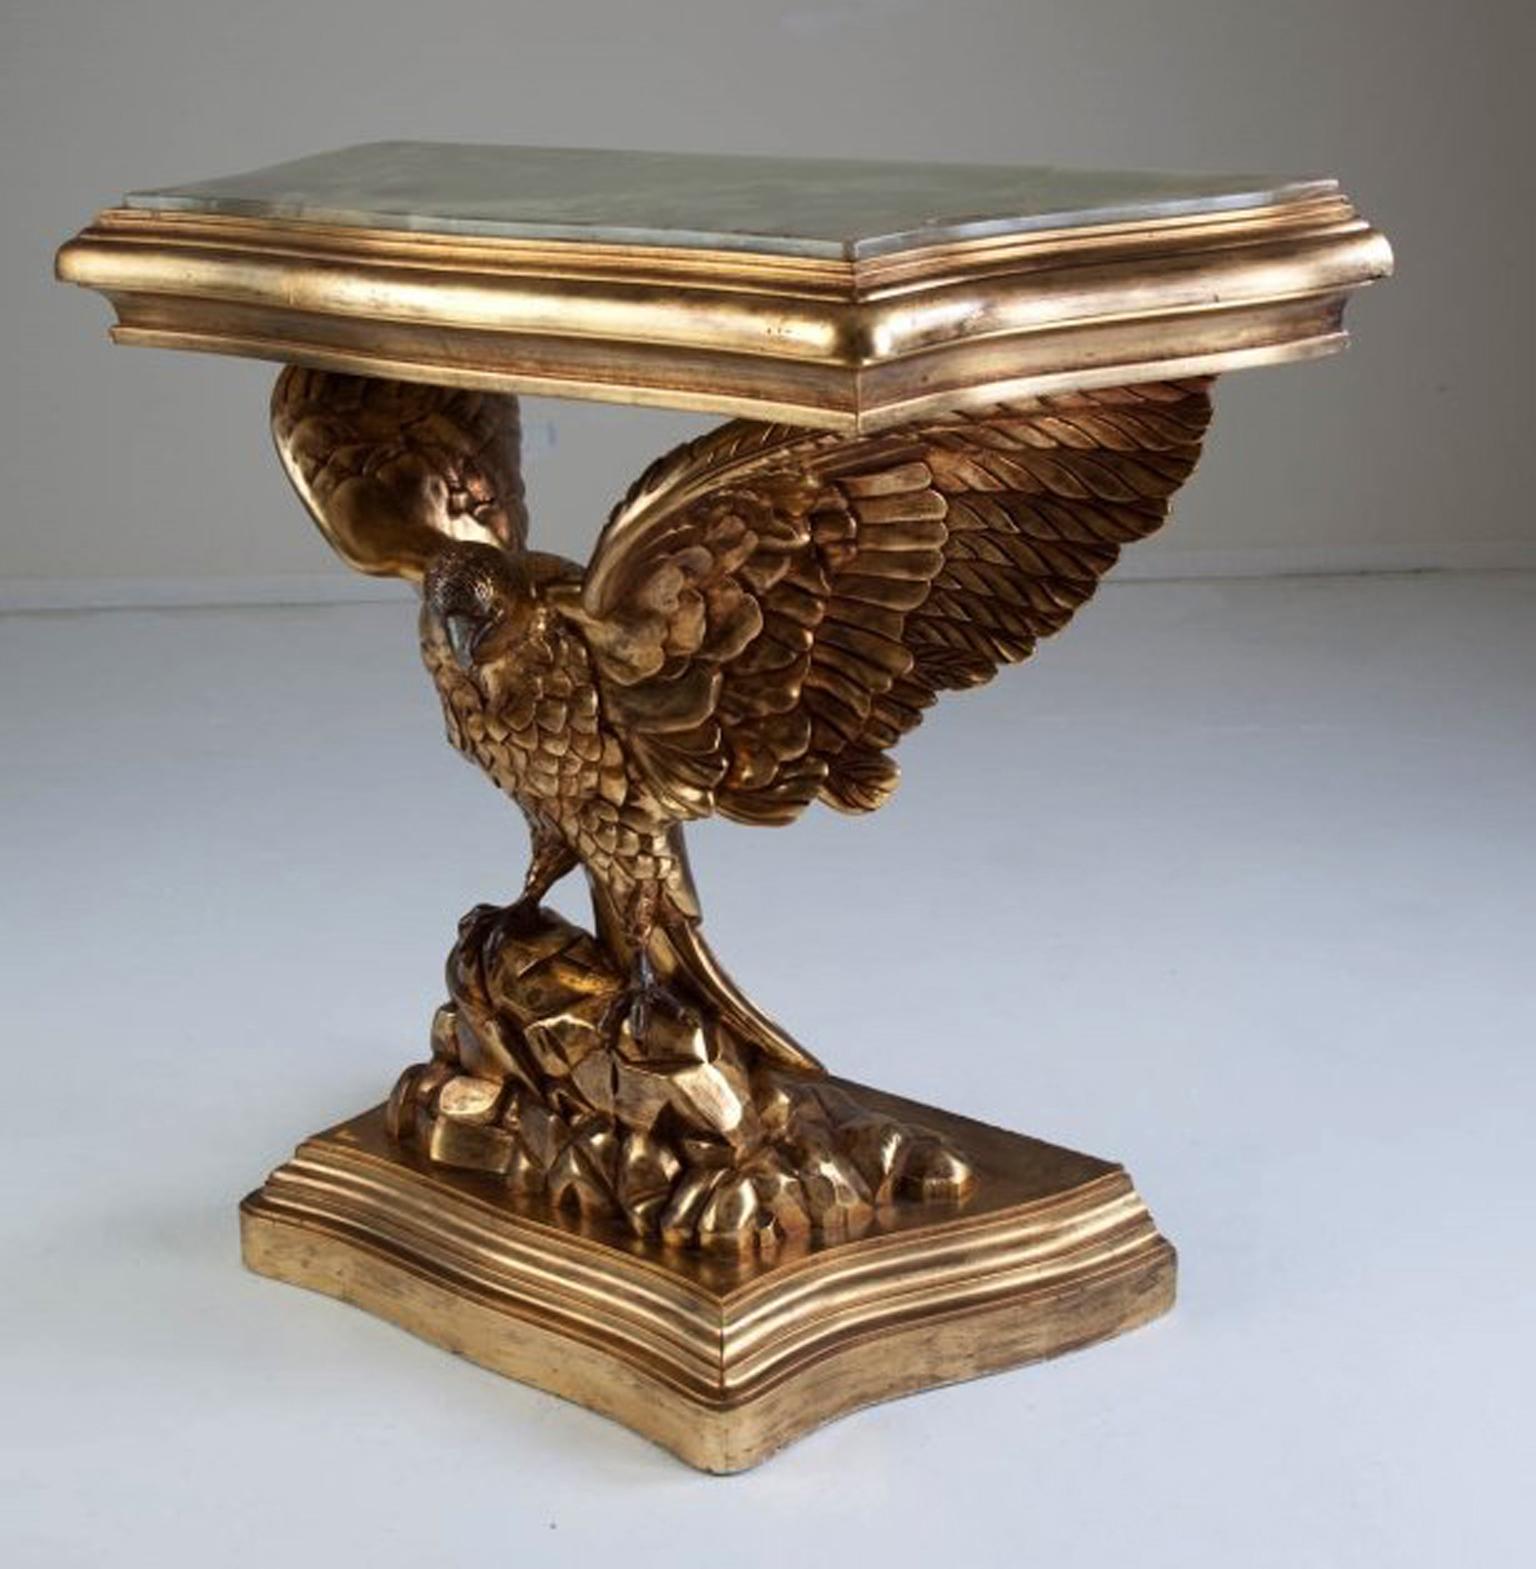 Impressive English George III style carved giltwood eagle-form console table with onyx top, 20th century.

The beautiful green onyx top is inset into a giltwood frieze, over a finely carved giltwood eagle with spread wings on rock-form base,